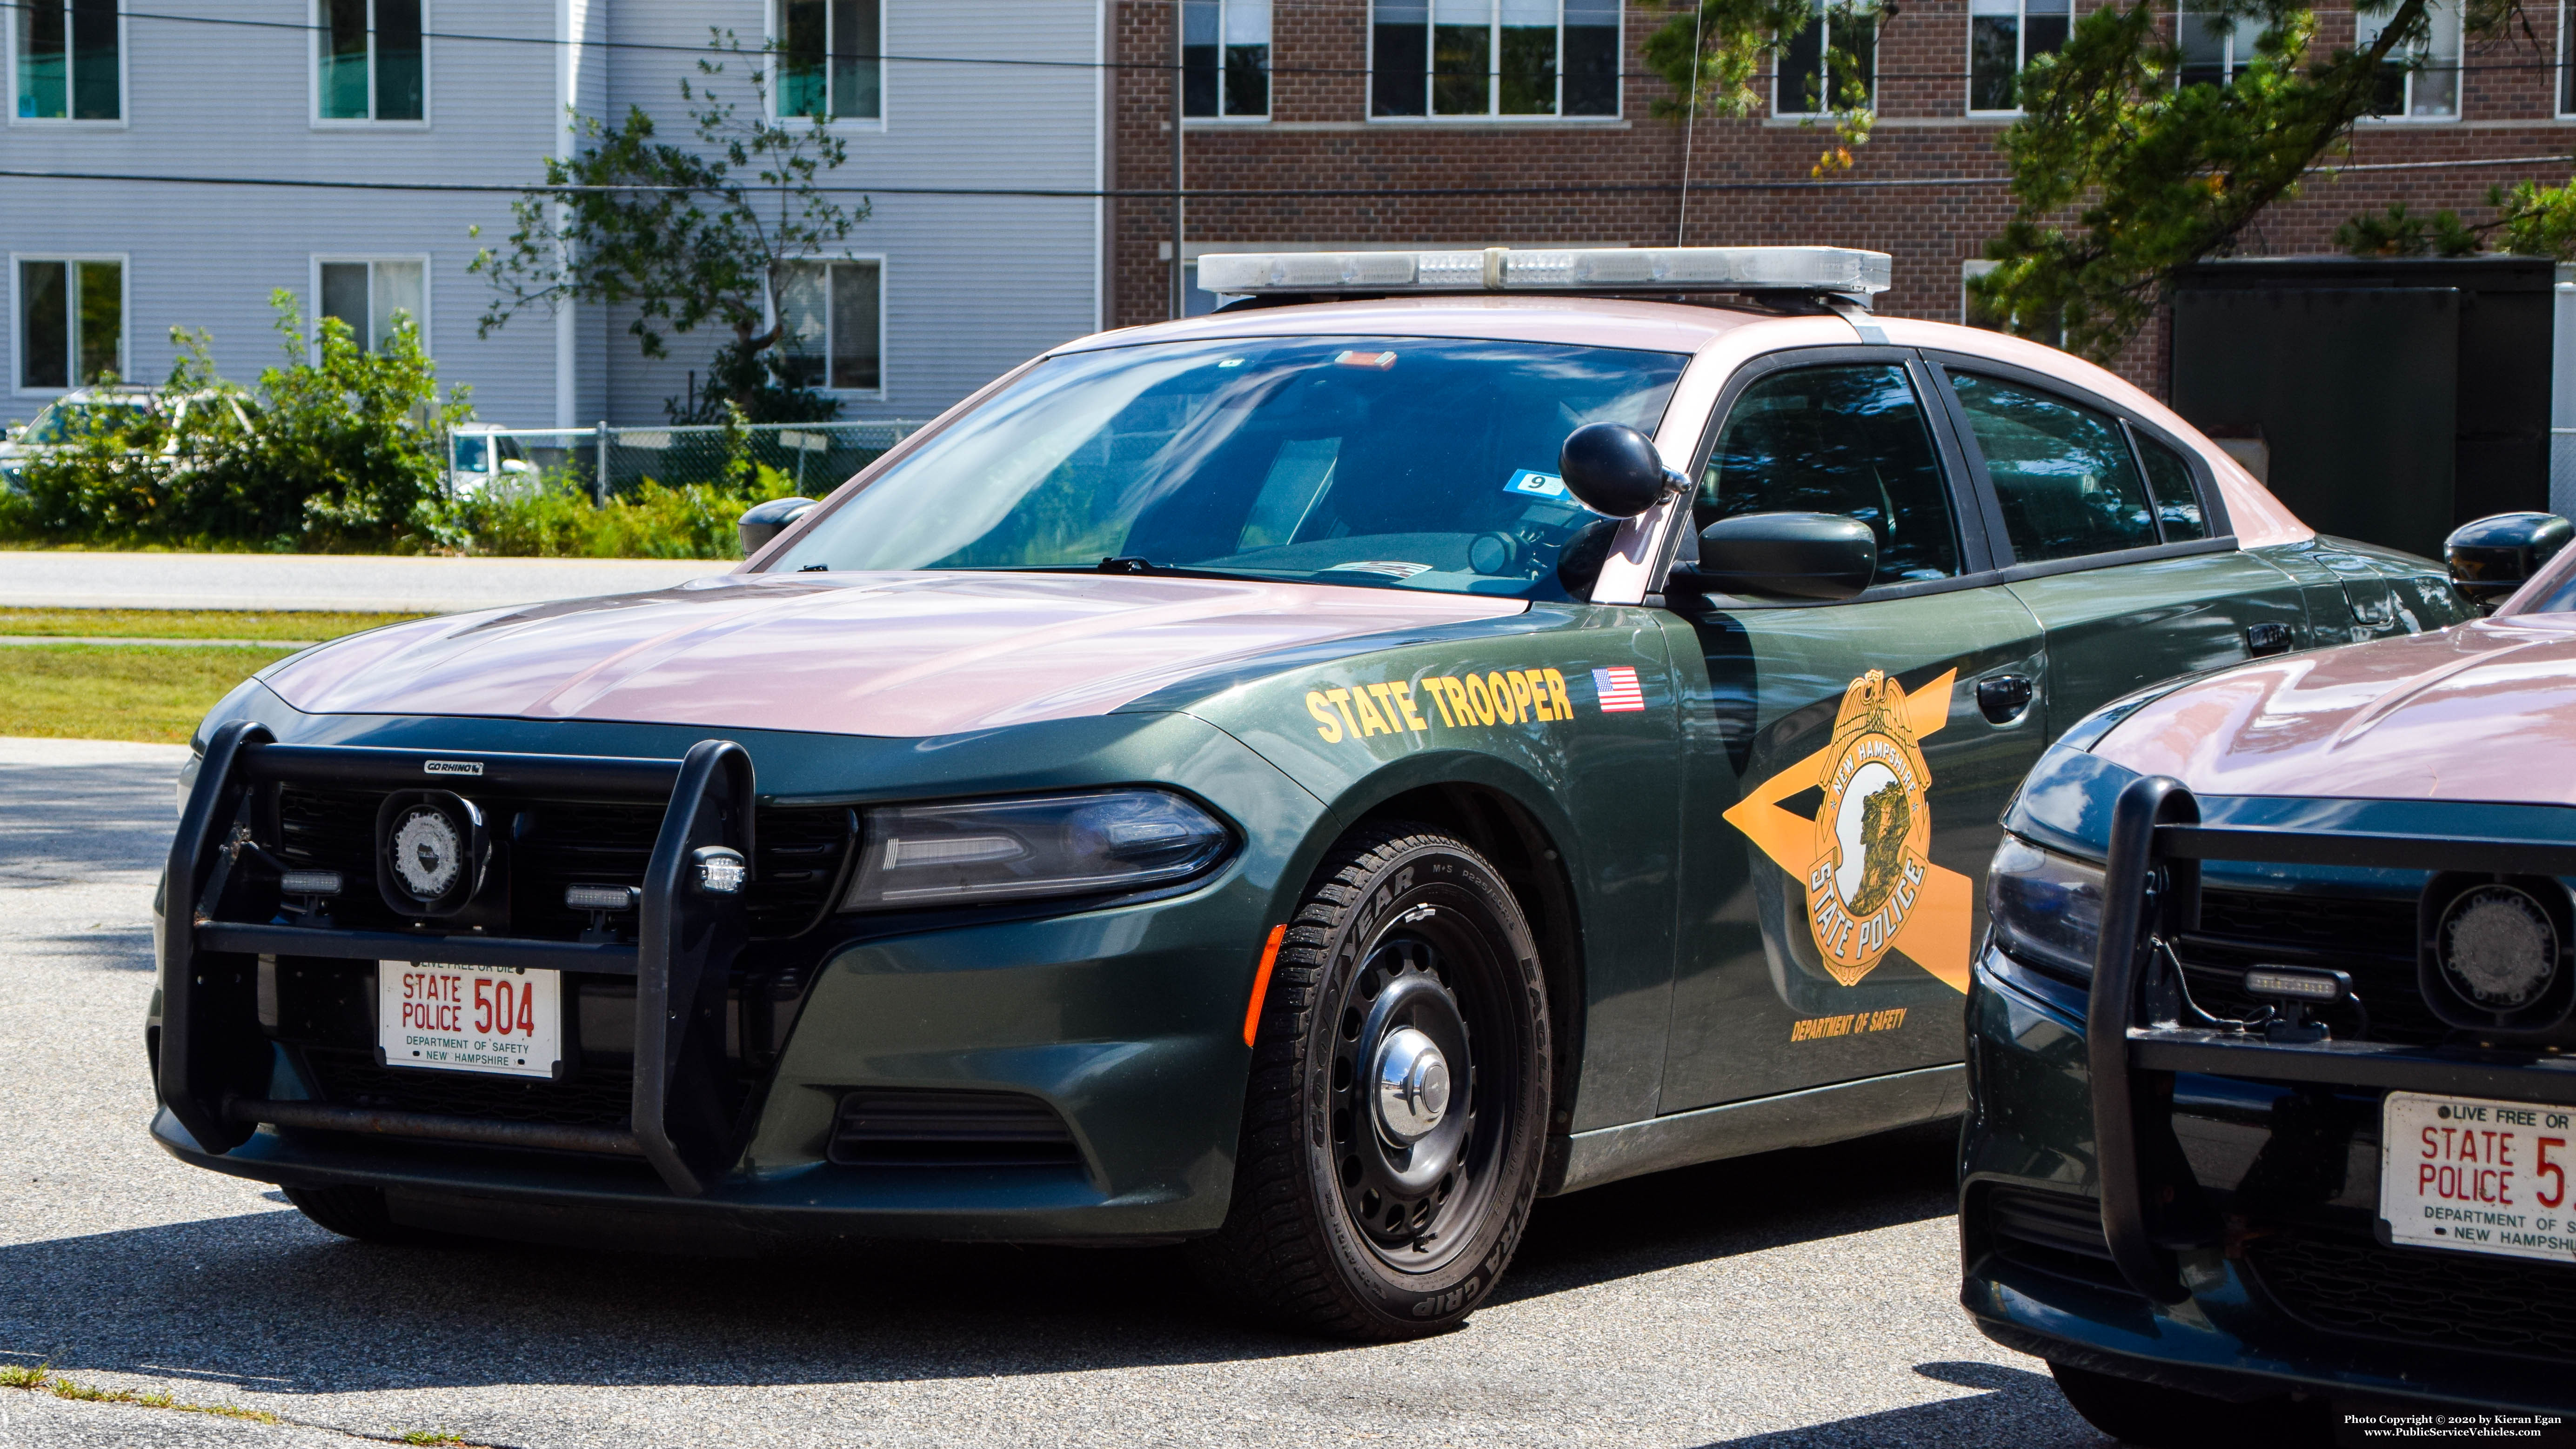 A photo  of New Hampshire State Police
            Cruiser 504, a 2015-2019 Dodge Charger             taken by Kieran Egan